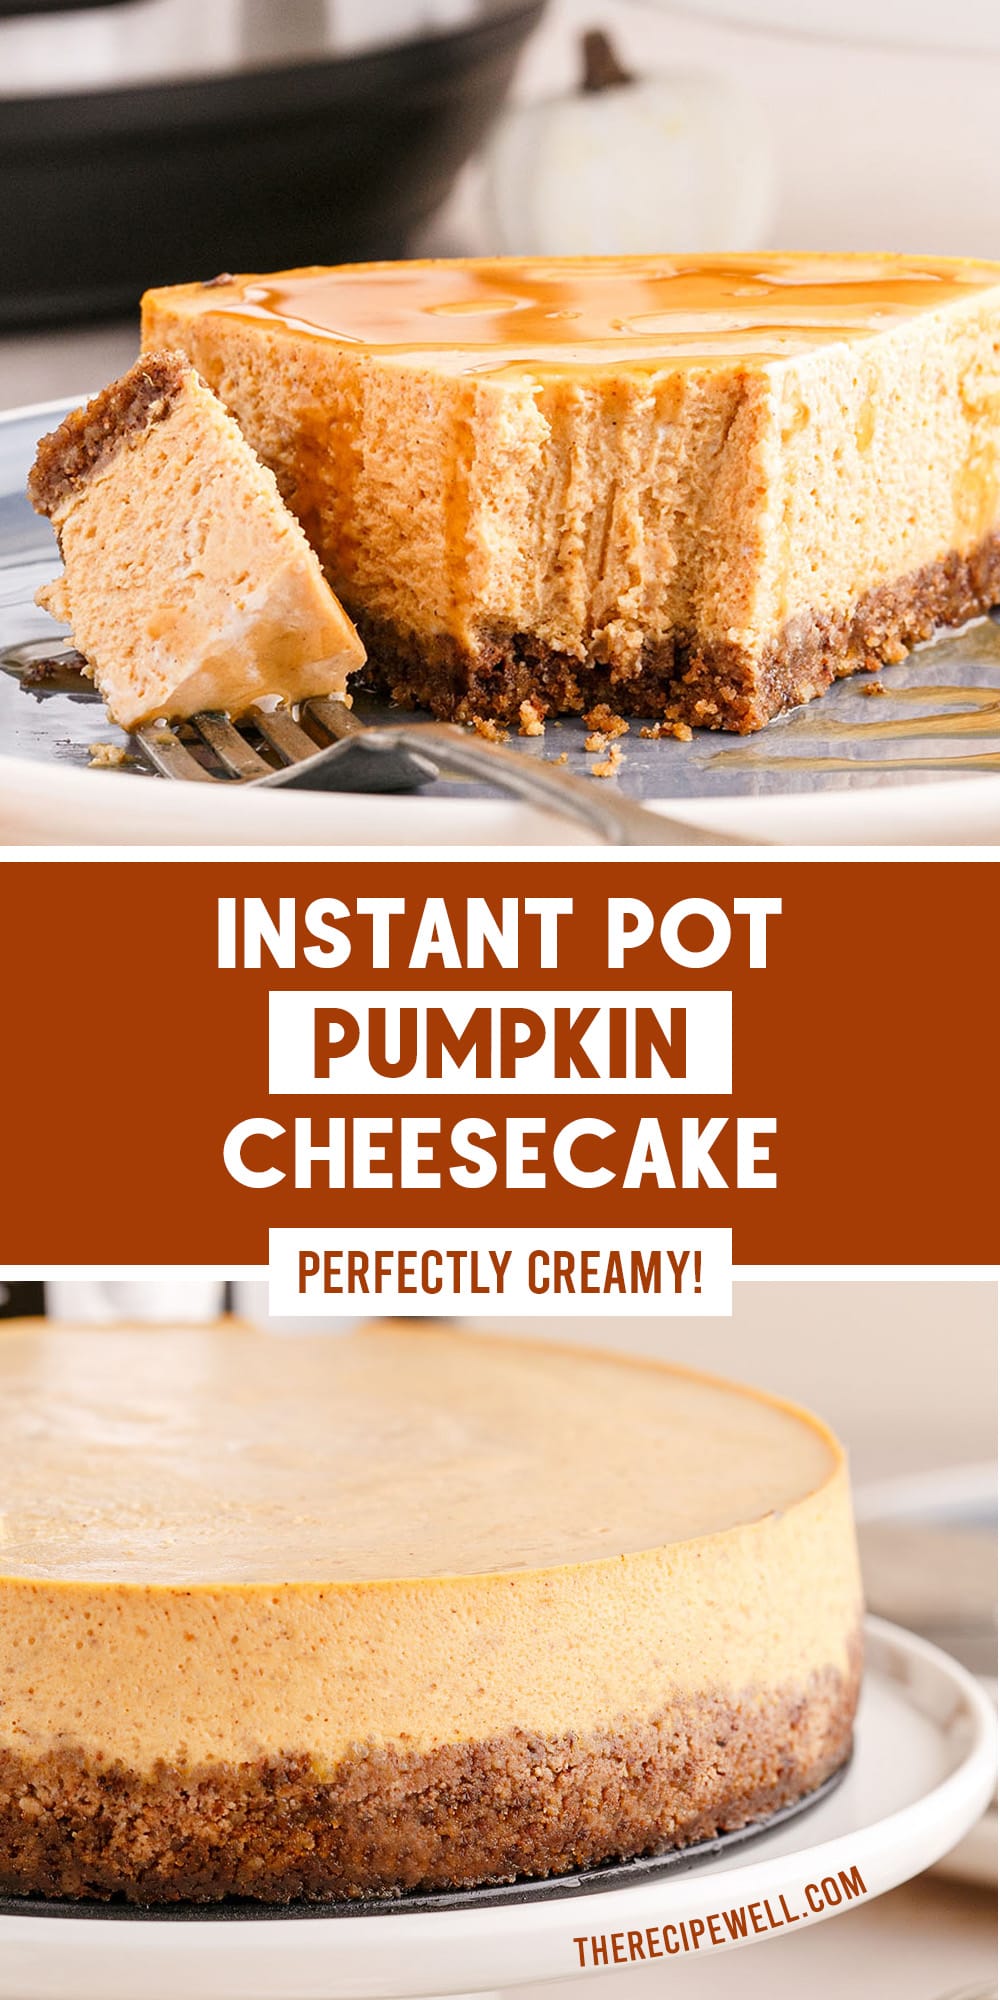 Instant Pot Pumpkin Cheesecake is basically pumpkin pie in cheesecake form. It's the perfect Thanksgiving dessert! via @therecipewell